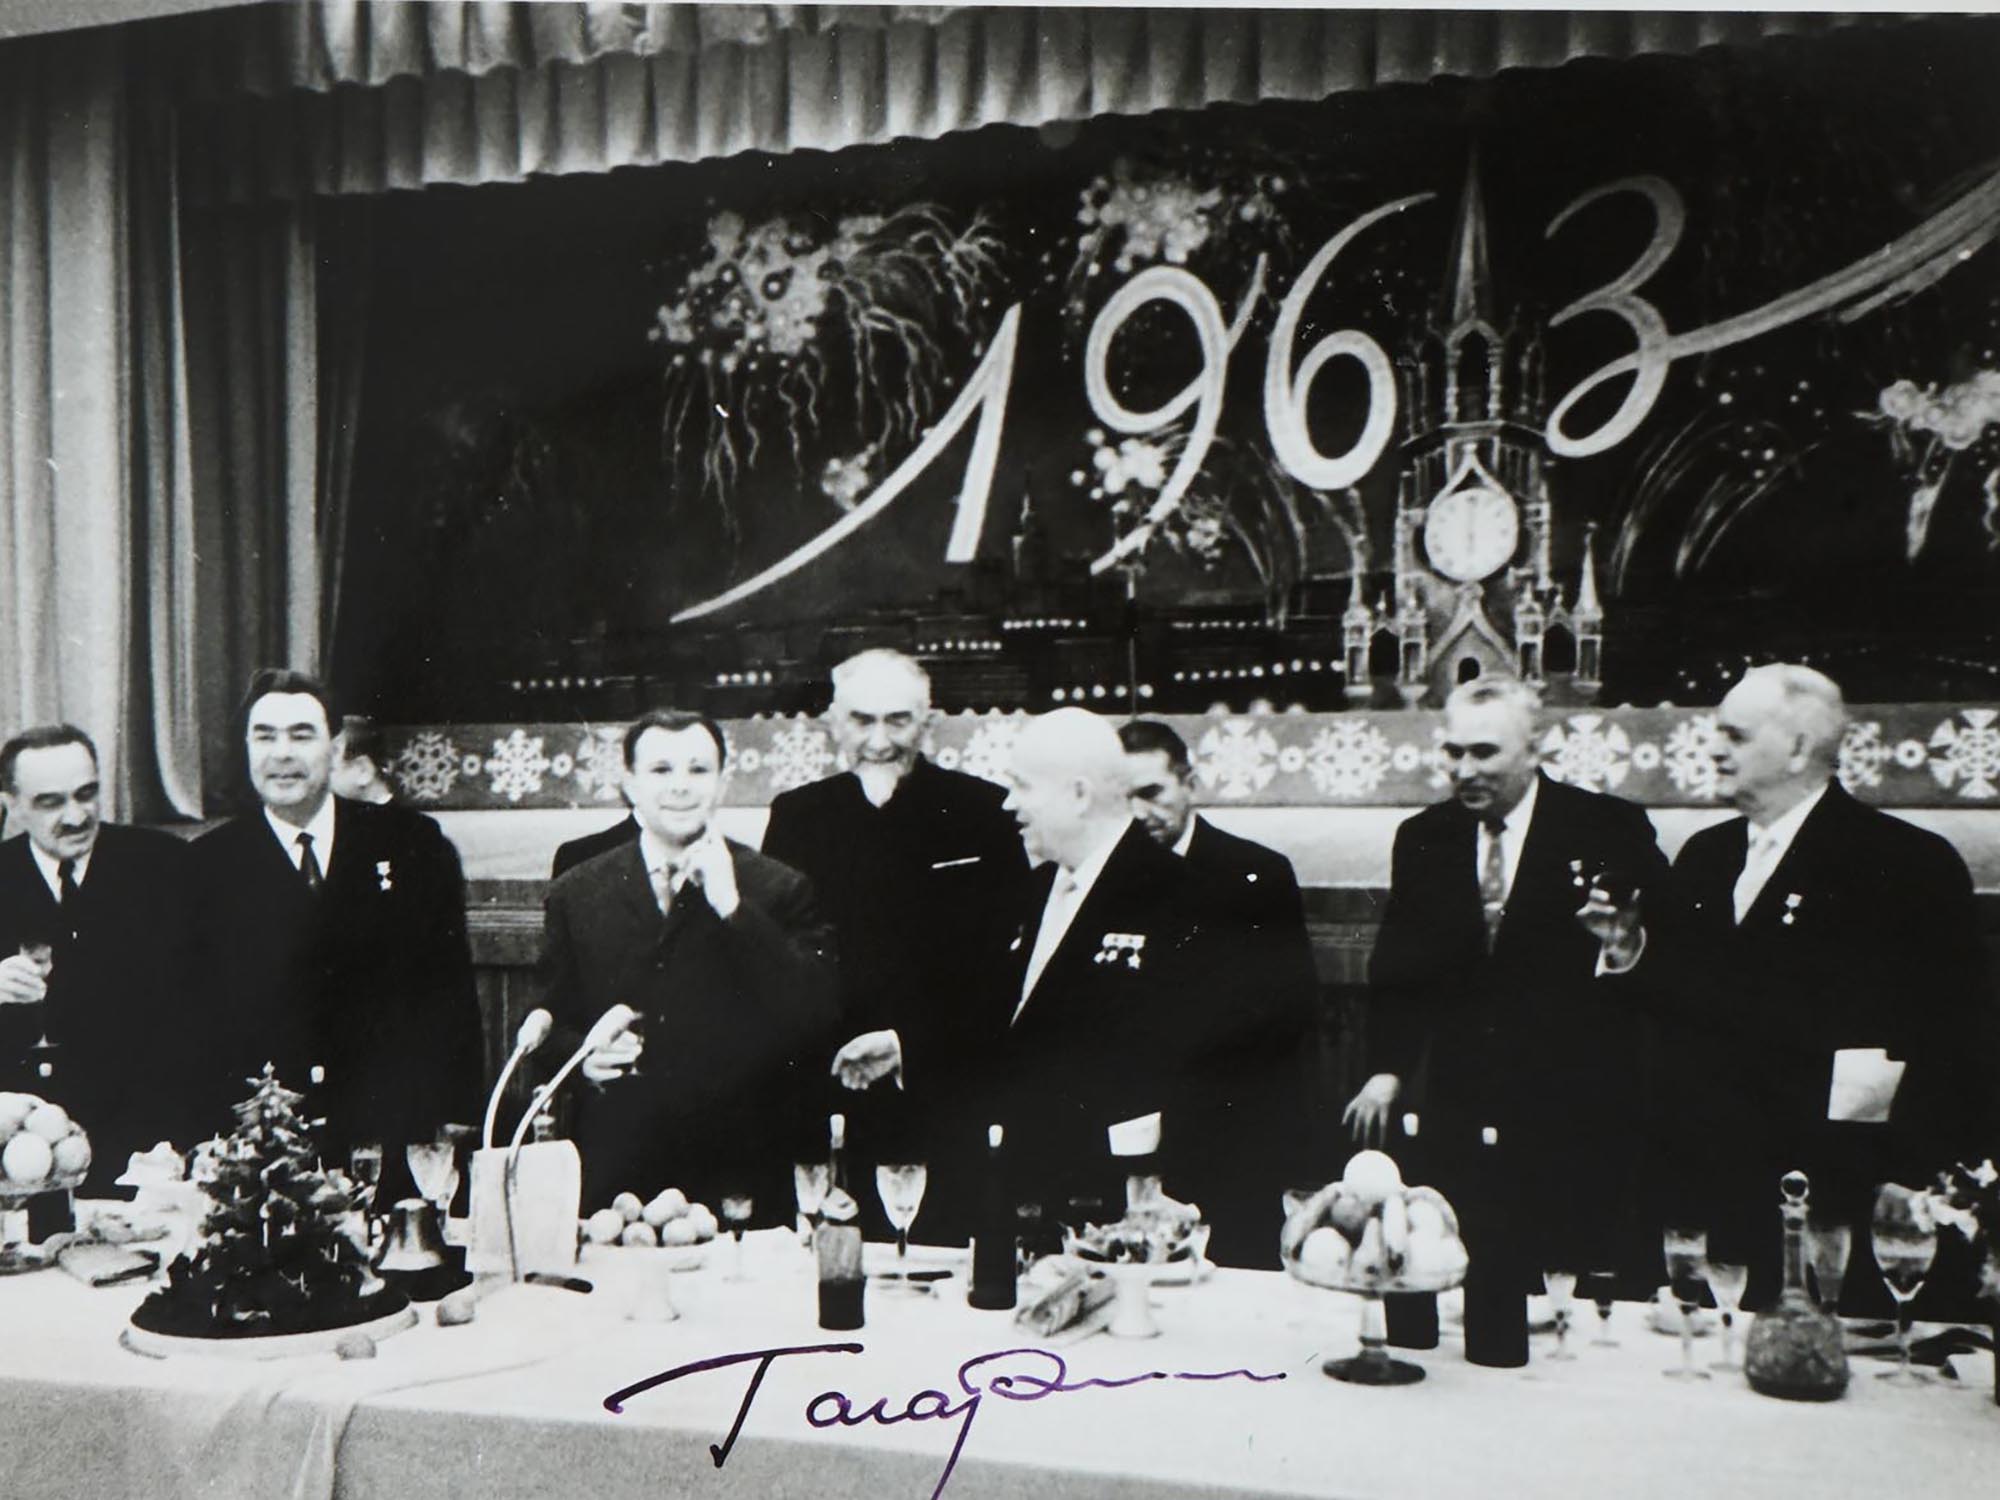 PHOTO OF 1963 NEW YEAR CELEBRATION SIGNED BY GAGARIN PIC-1